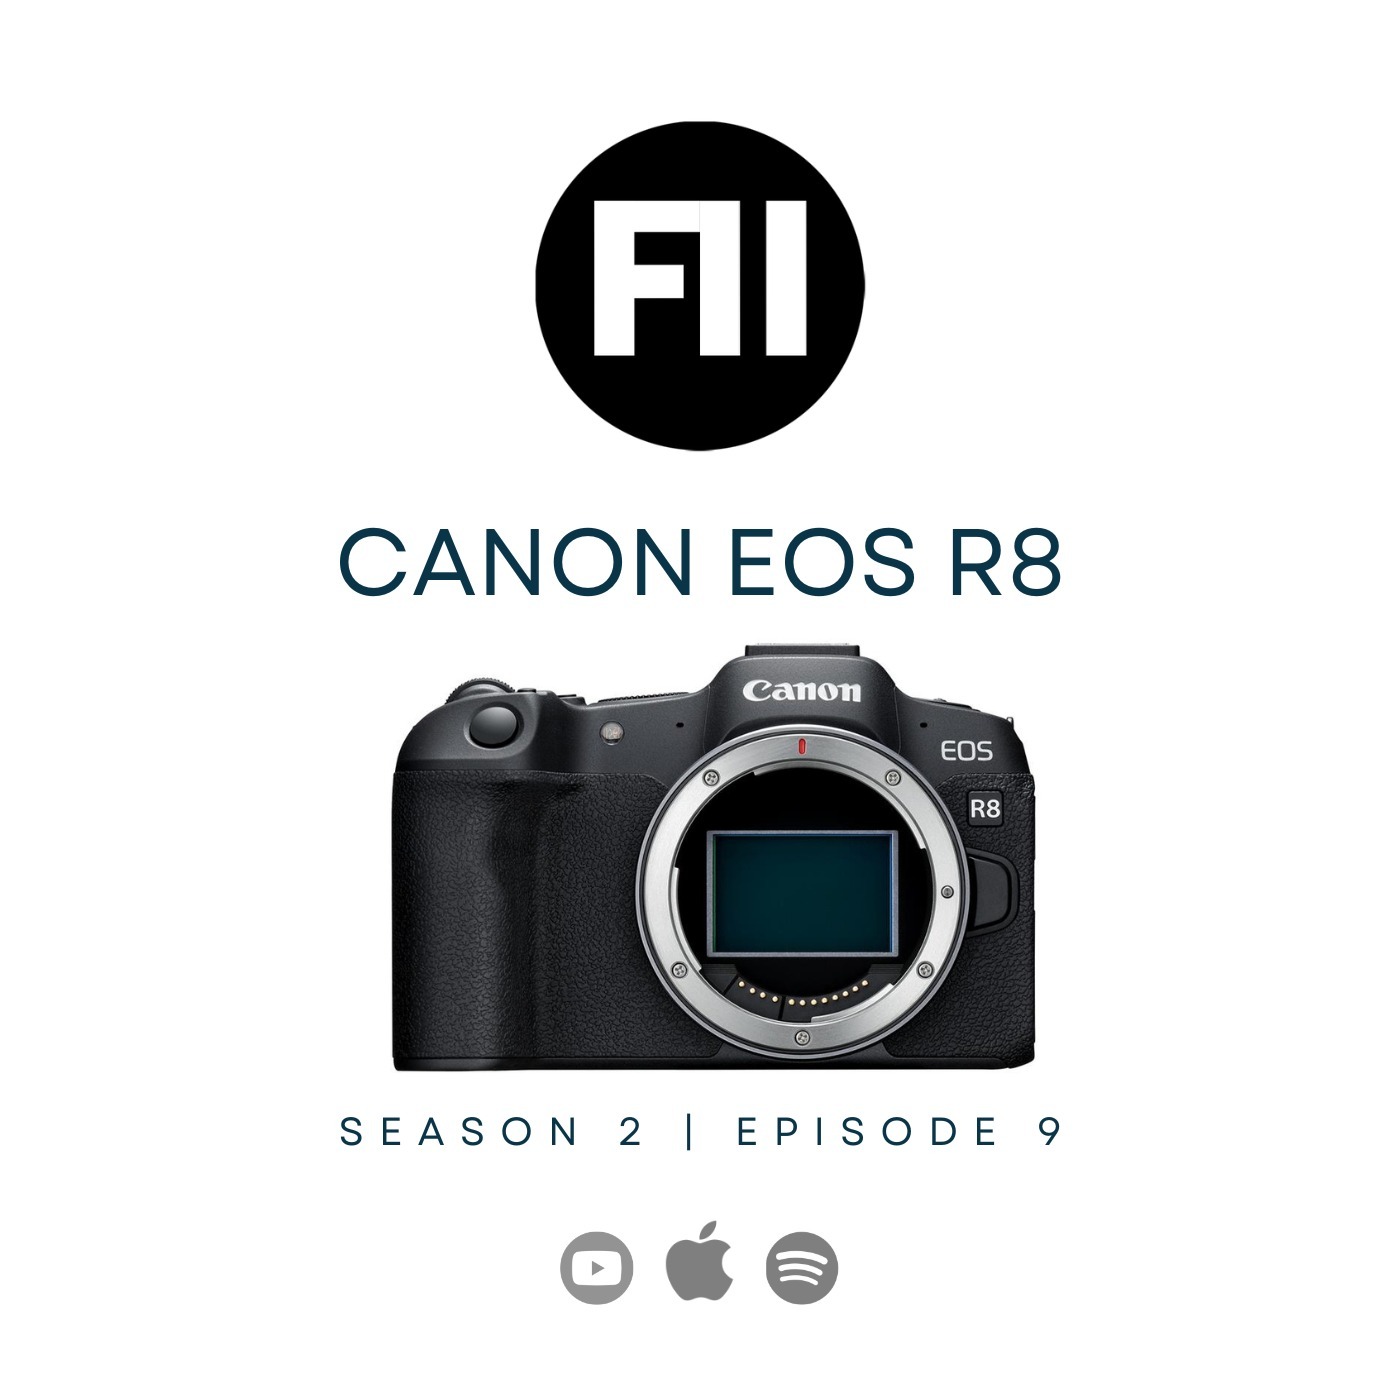 Let's Talk About The Canon EOS R8 (S02E09)